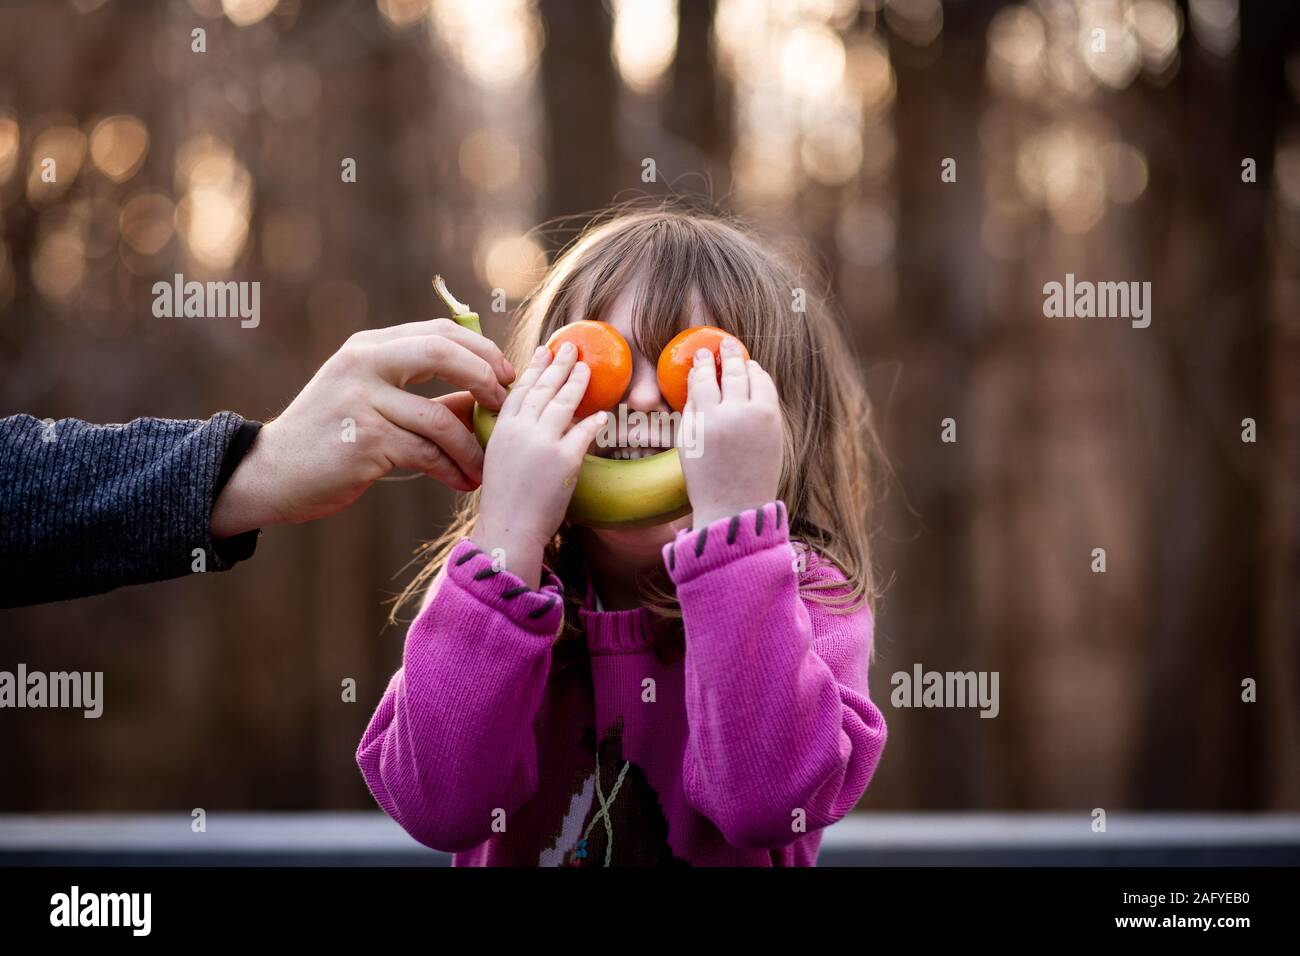 young girl puts fruit on face to make silly face outside Stock Photo